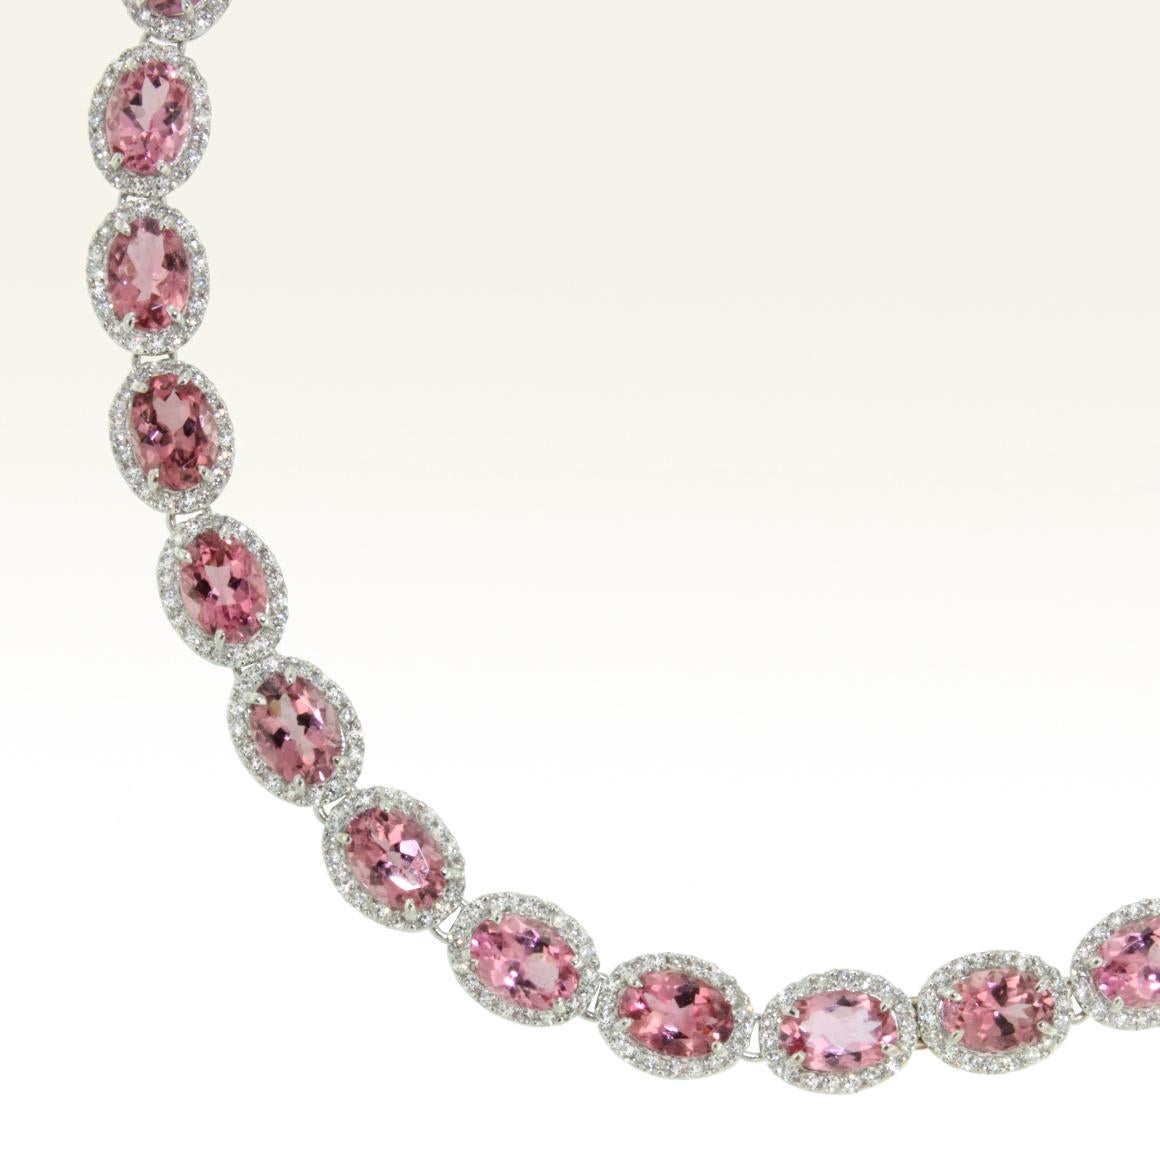 Oval Cut 18 Karat White Gold with Pink Tourmaline and White Diamond Necklace